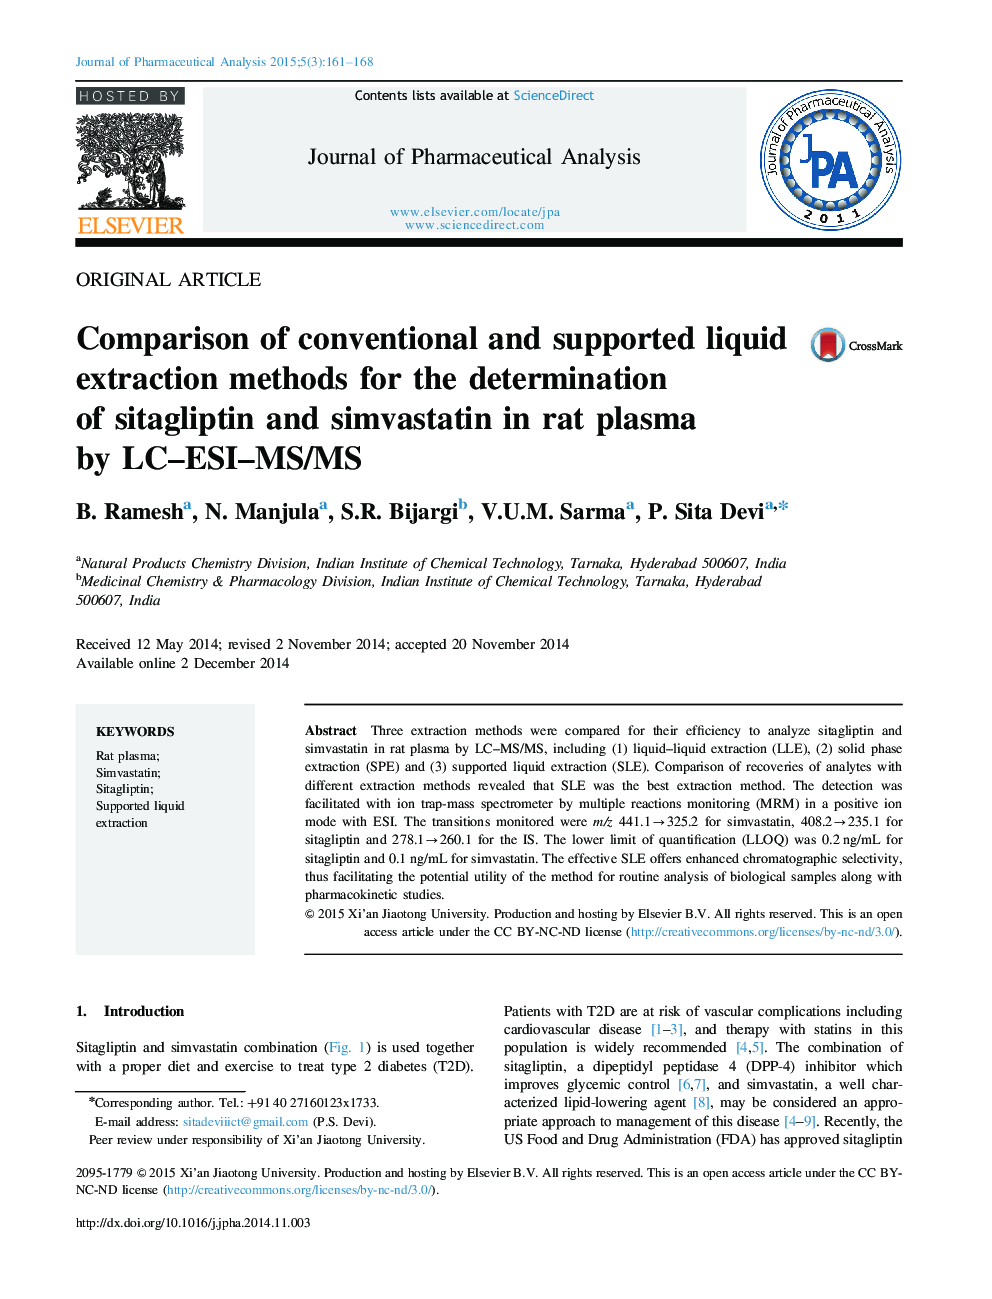 Comparison of conventional and supported liquid extraction methods for the determination of sitagliptin and simvastatin in rat plasma by LC–ESI–MS/MS 